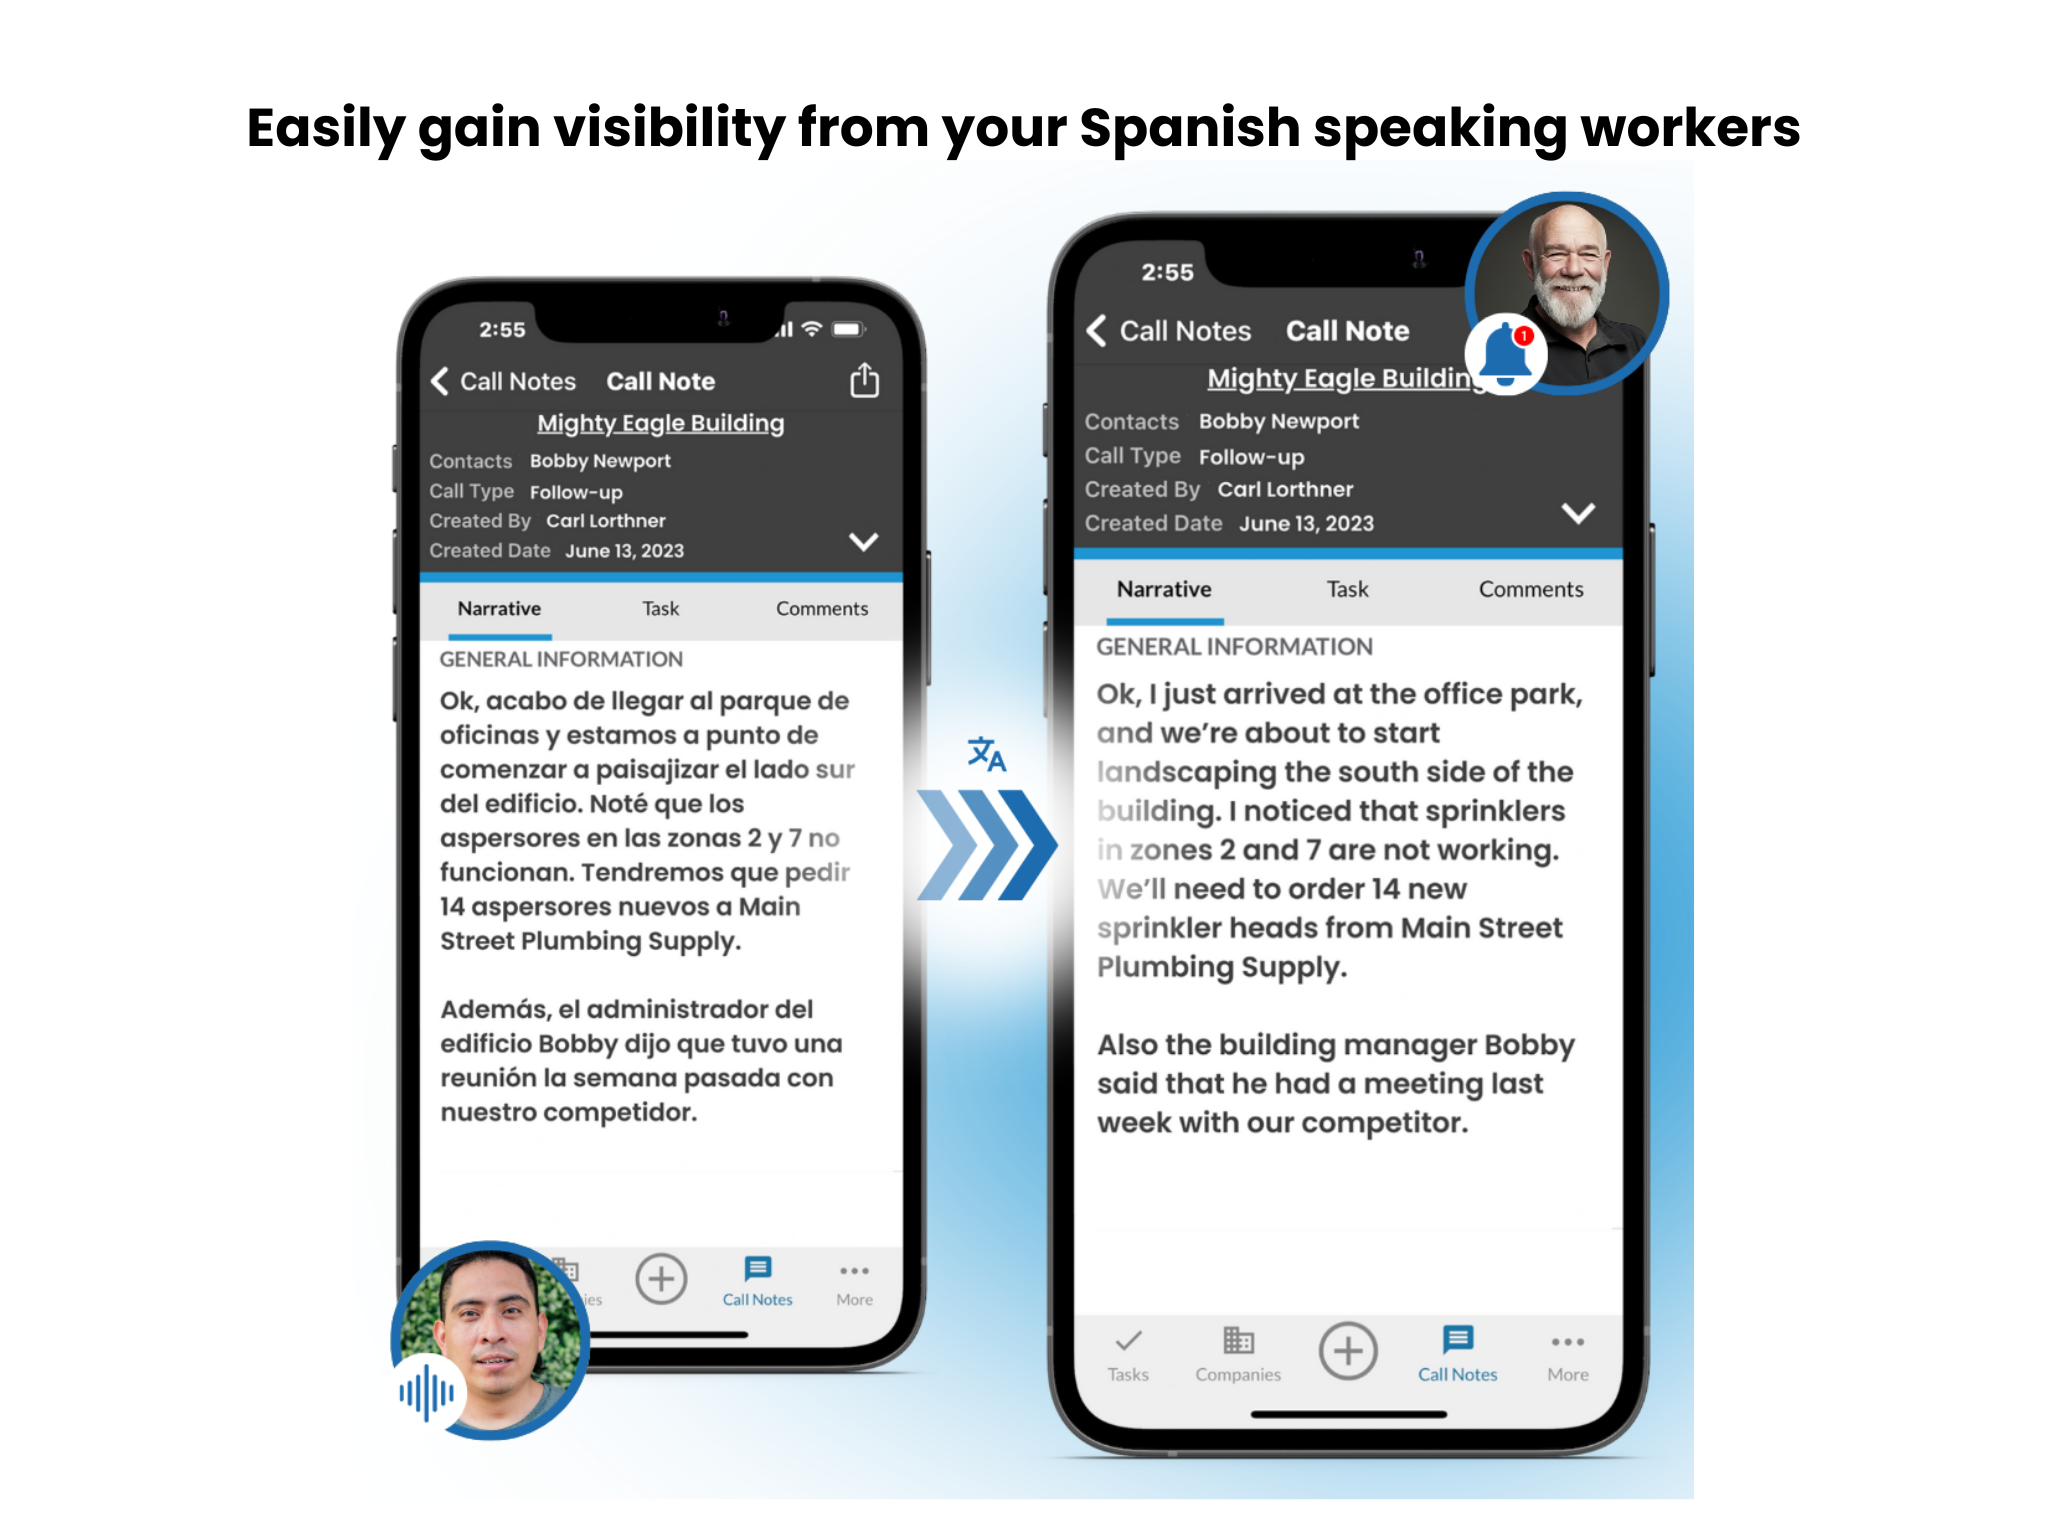 Easily gain visibility from your Spanish speaking workers. They can leave notes in Spanish and you can get quickly translated notes in English.